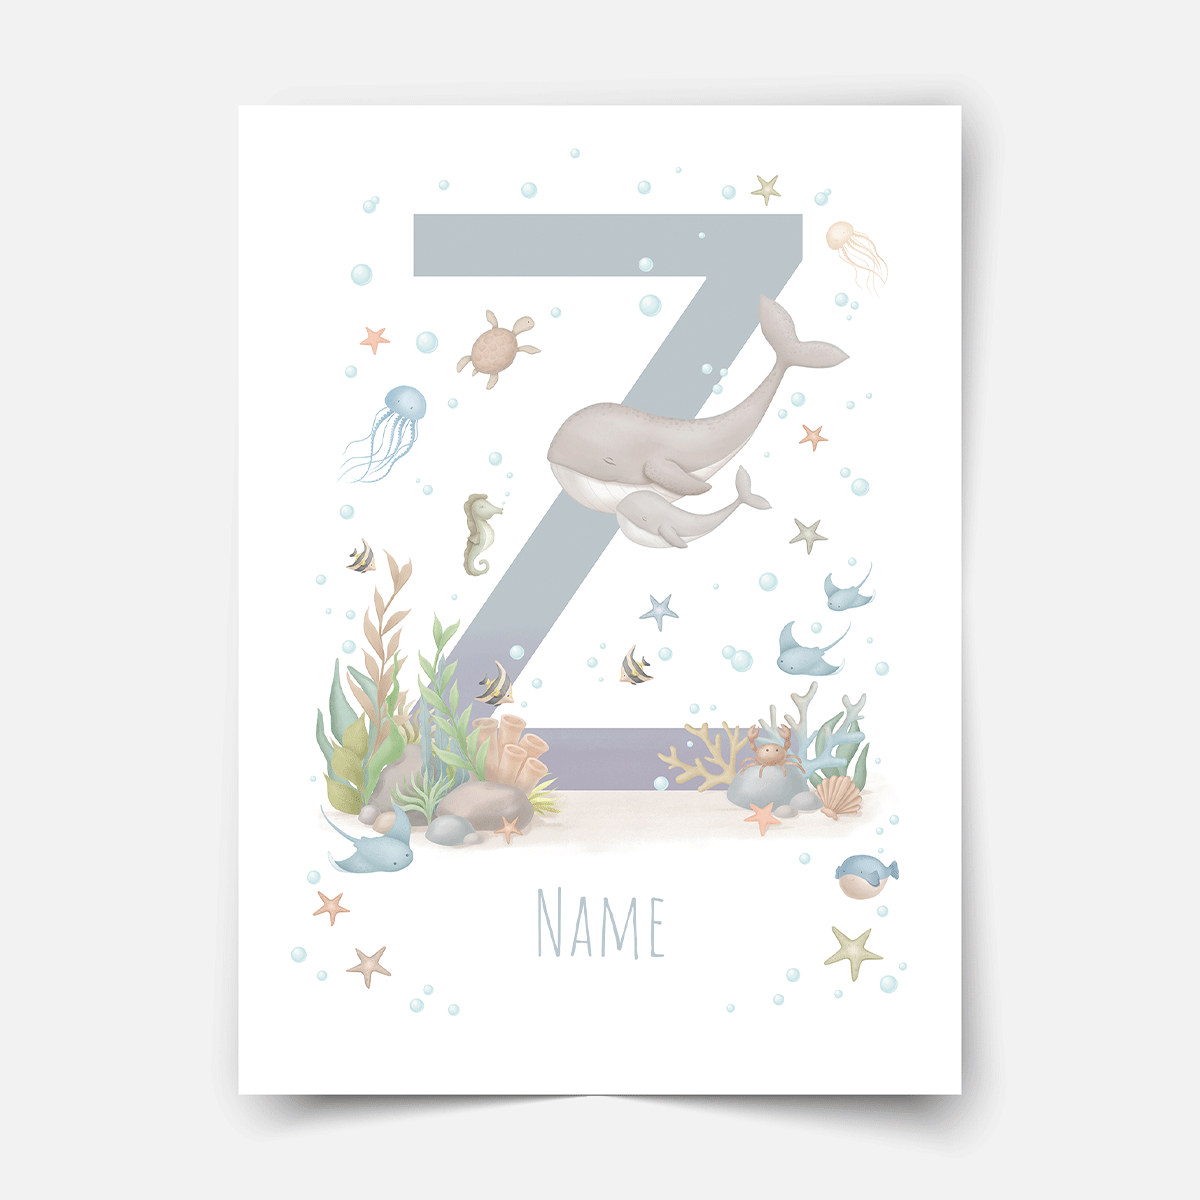 Personalised print - ABC Letters - Magical ocean (blue)